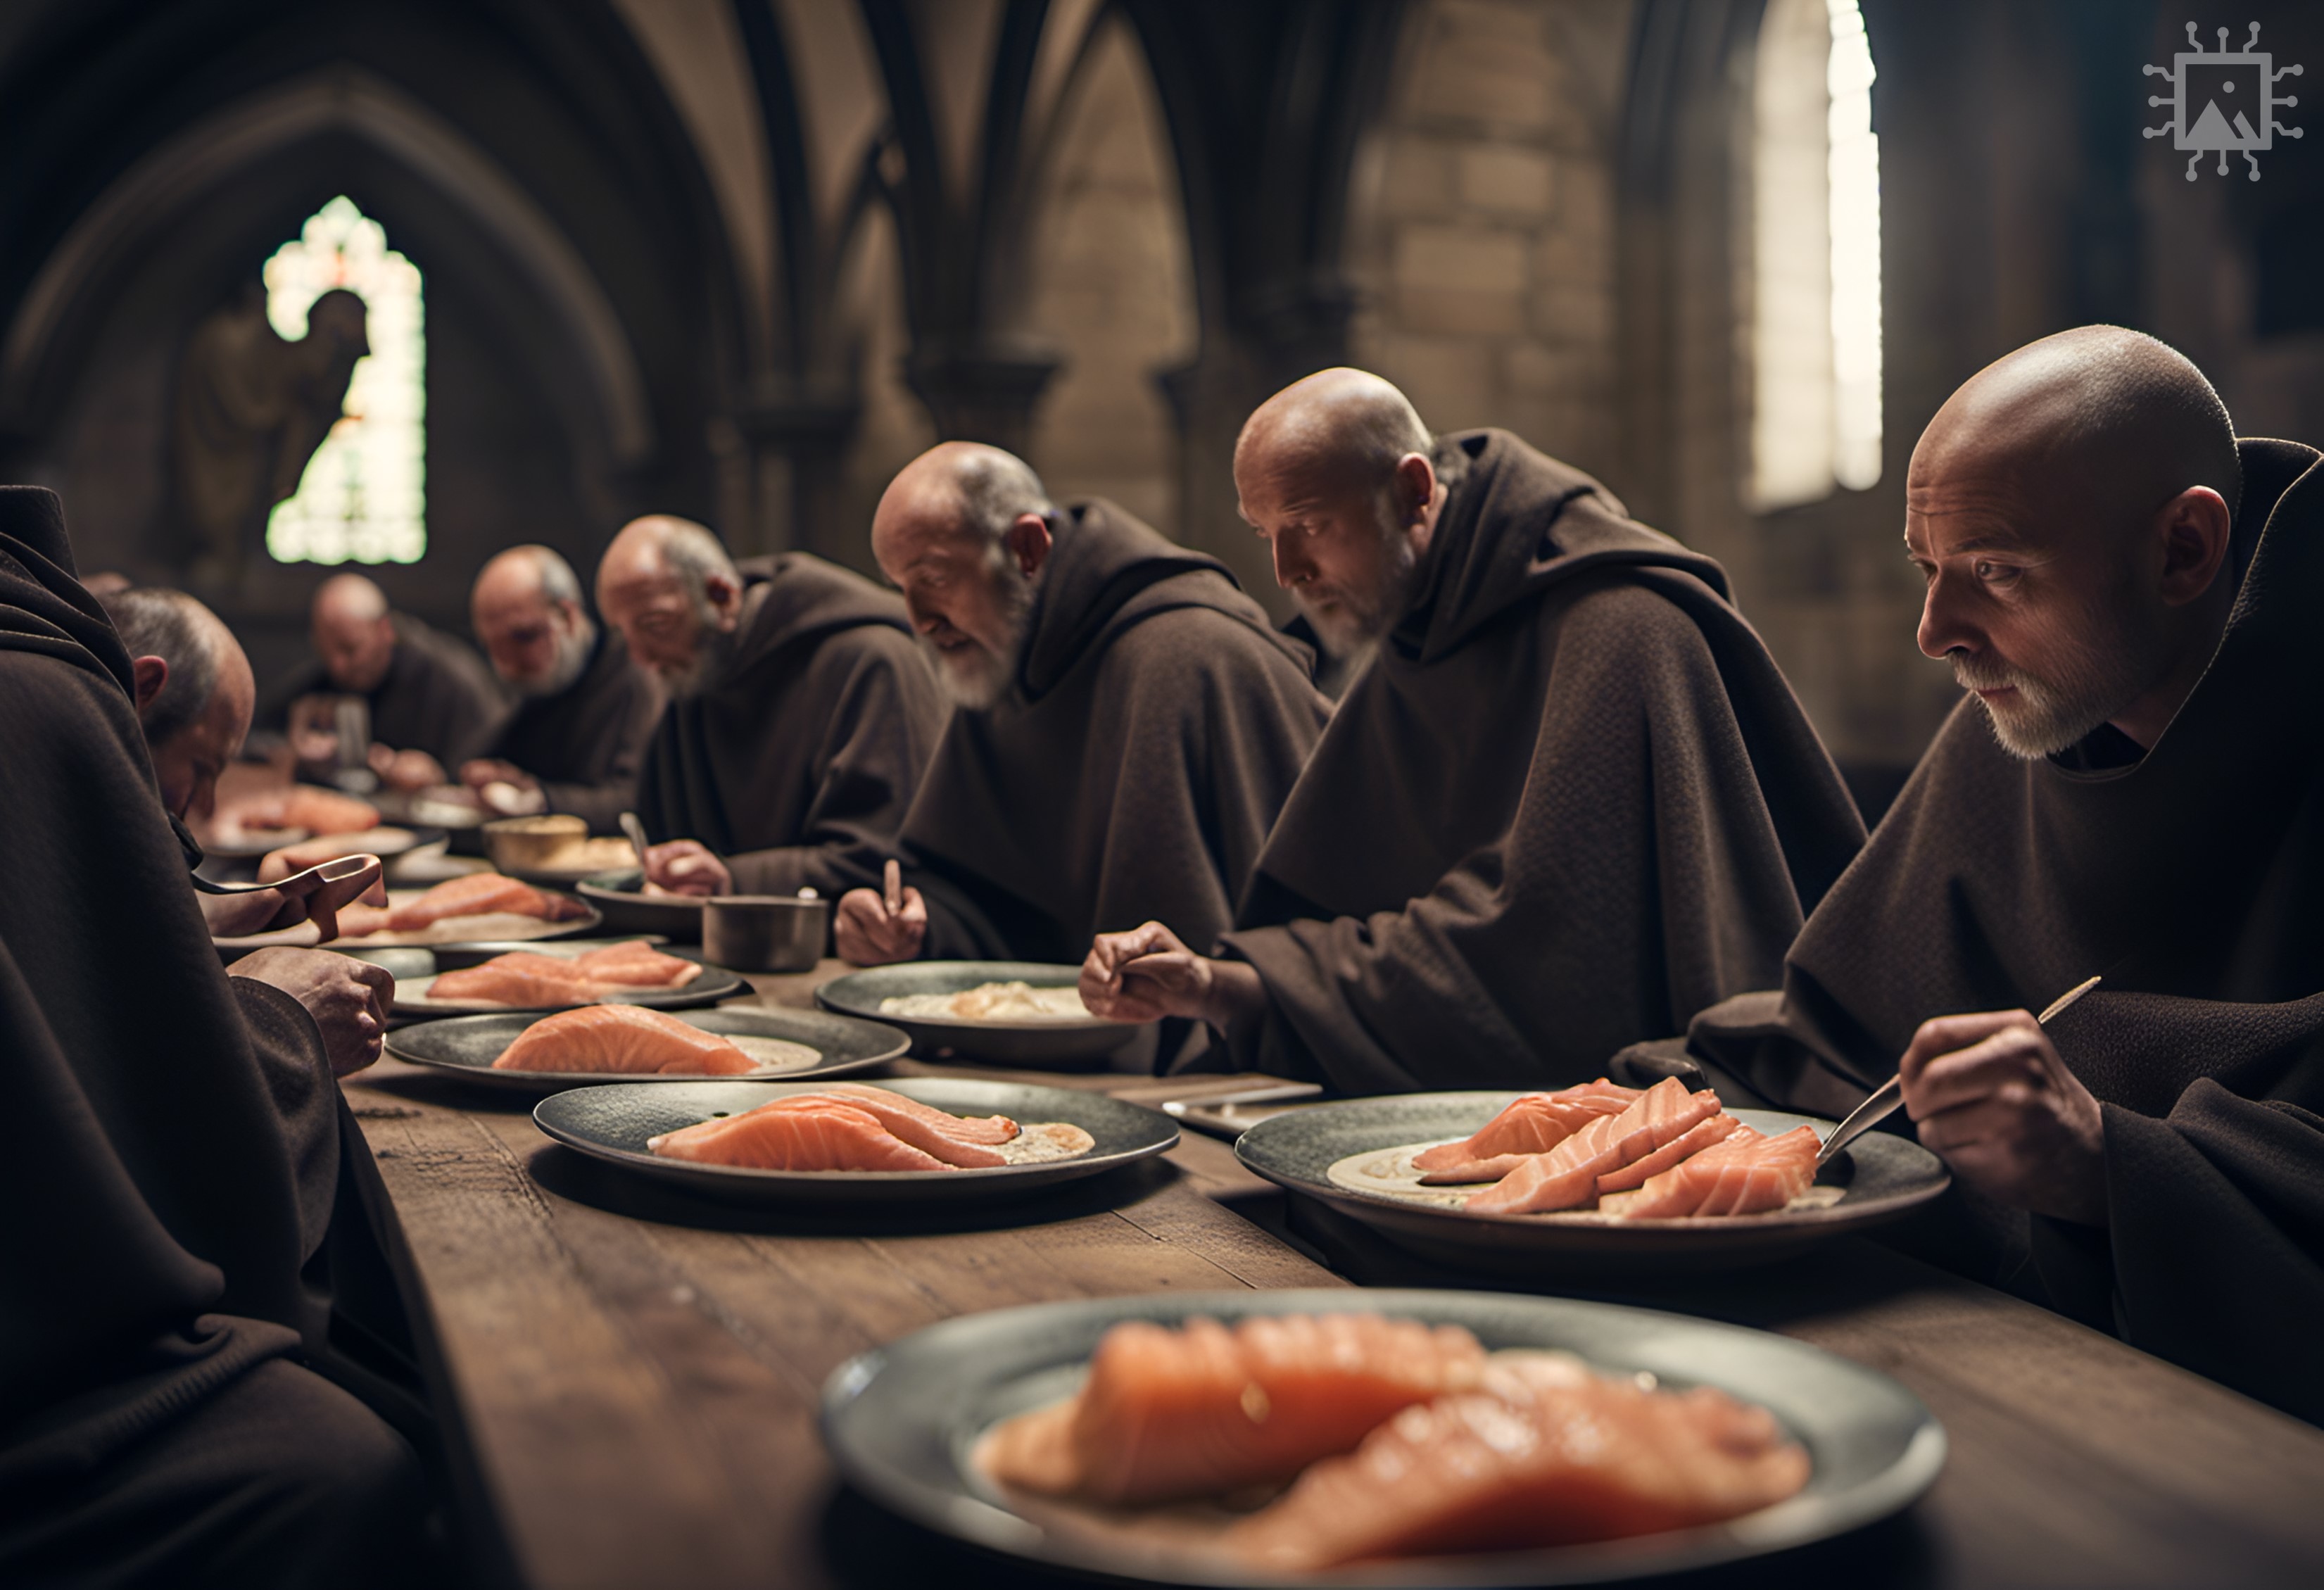 Artificial Intelligence-generated image produced using DreamStudio [accessed 12-08-2023]: ‘A group of clean-shaven medieval Benedictine monks eating cooked salmon in a medieval refectory.’ Find out more: rochestercathedral.org/research/ai